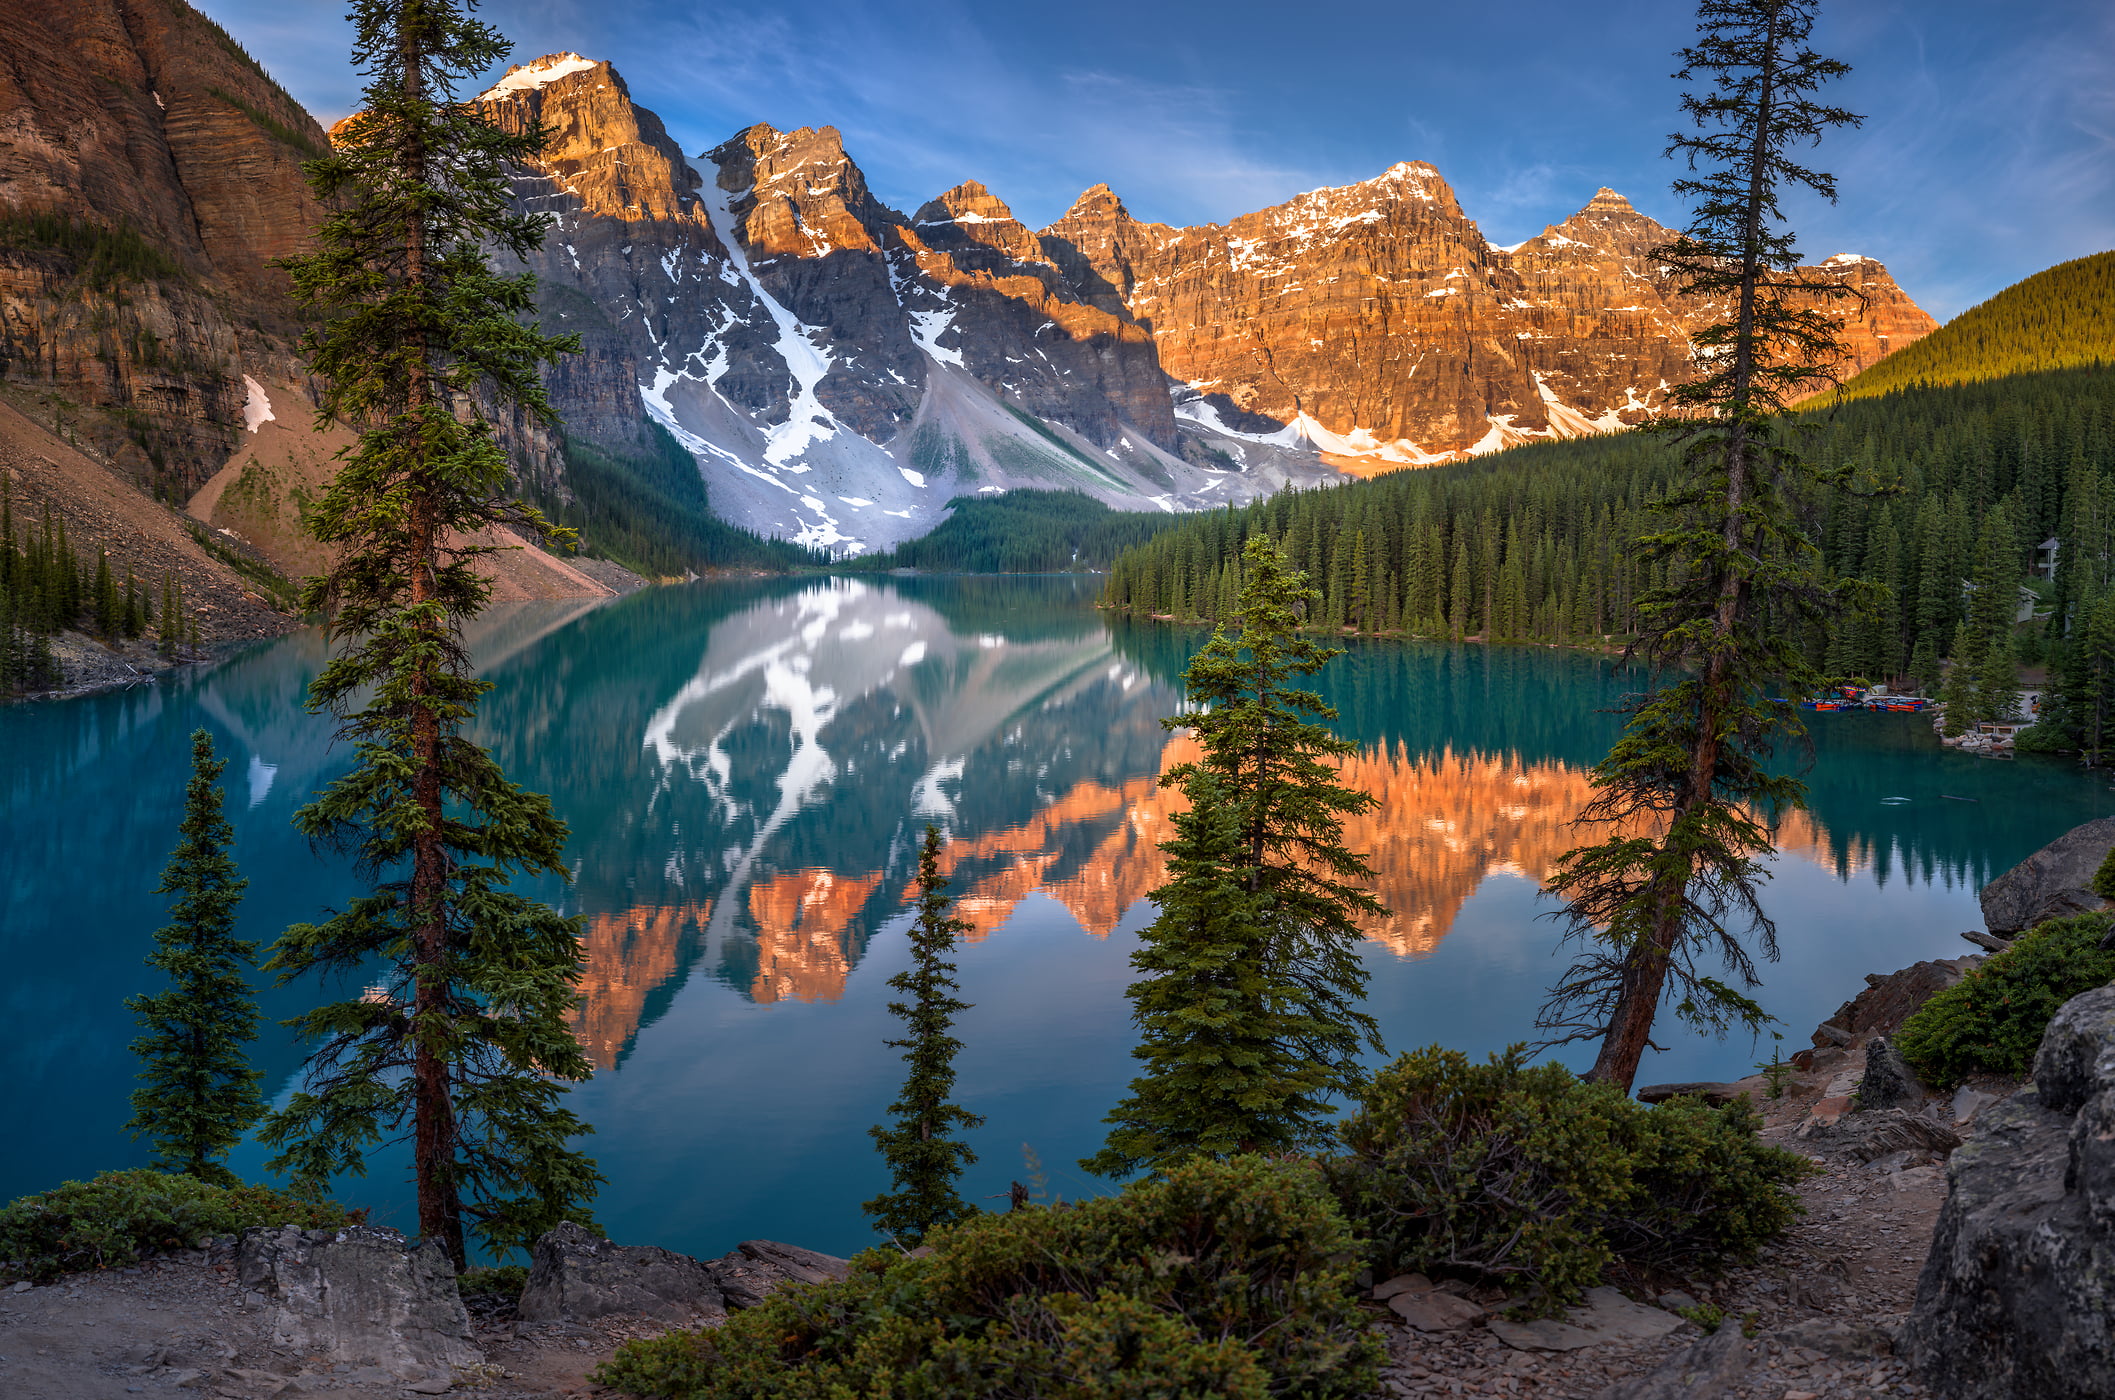 494 megapixels! A very high resolution, large-format VAST photo print of Moraine Lake: a beautiful lake with mountains in the background and reflected in the water; fine art nature landscape photograph created by Tim Shields in Banff National Park, Canada